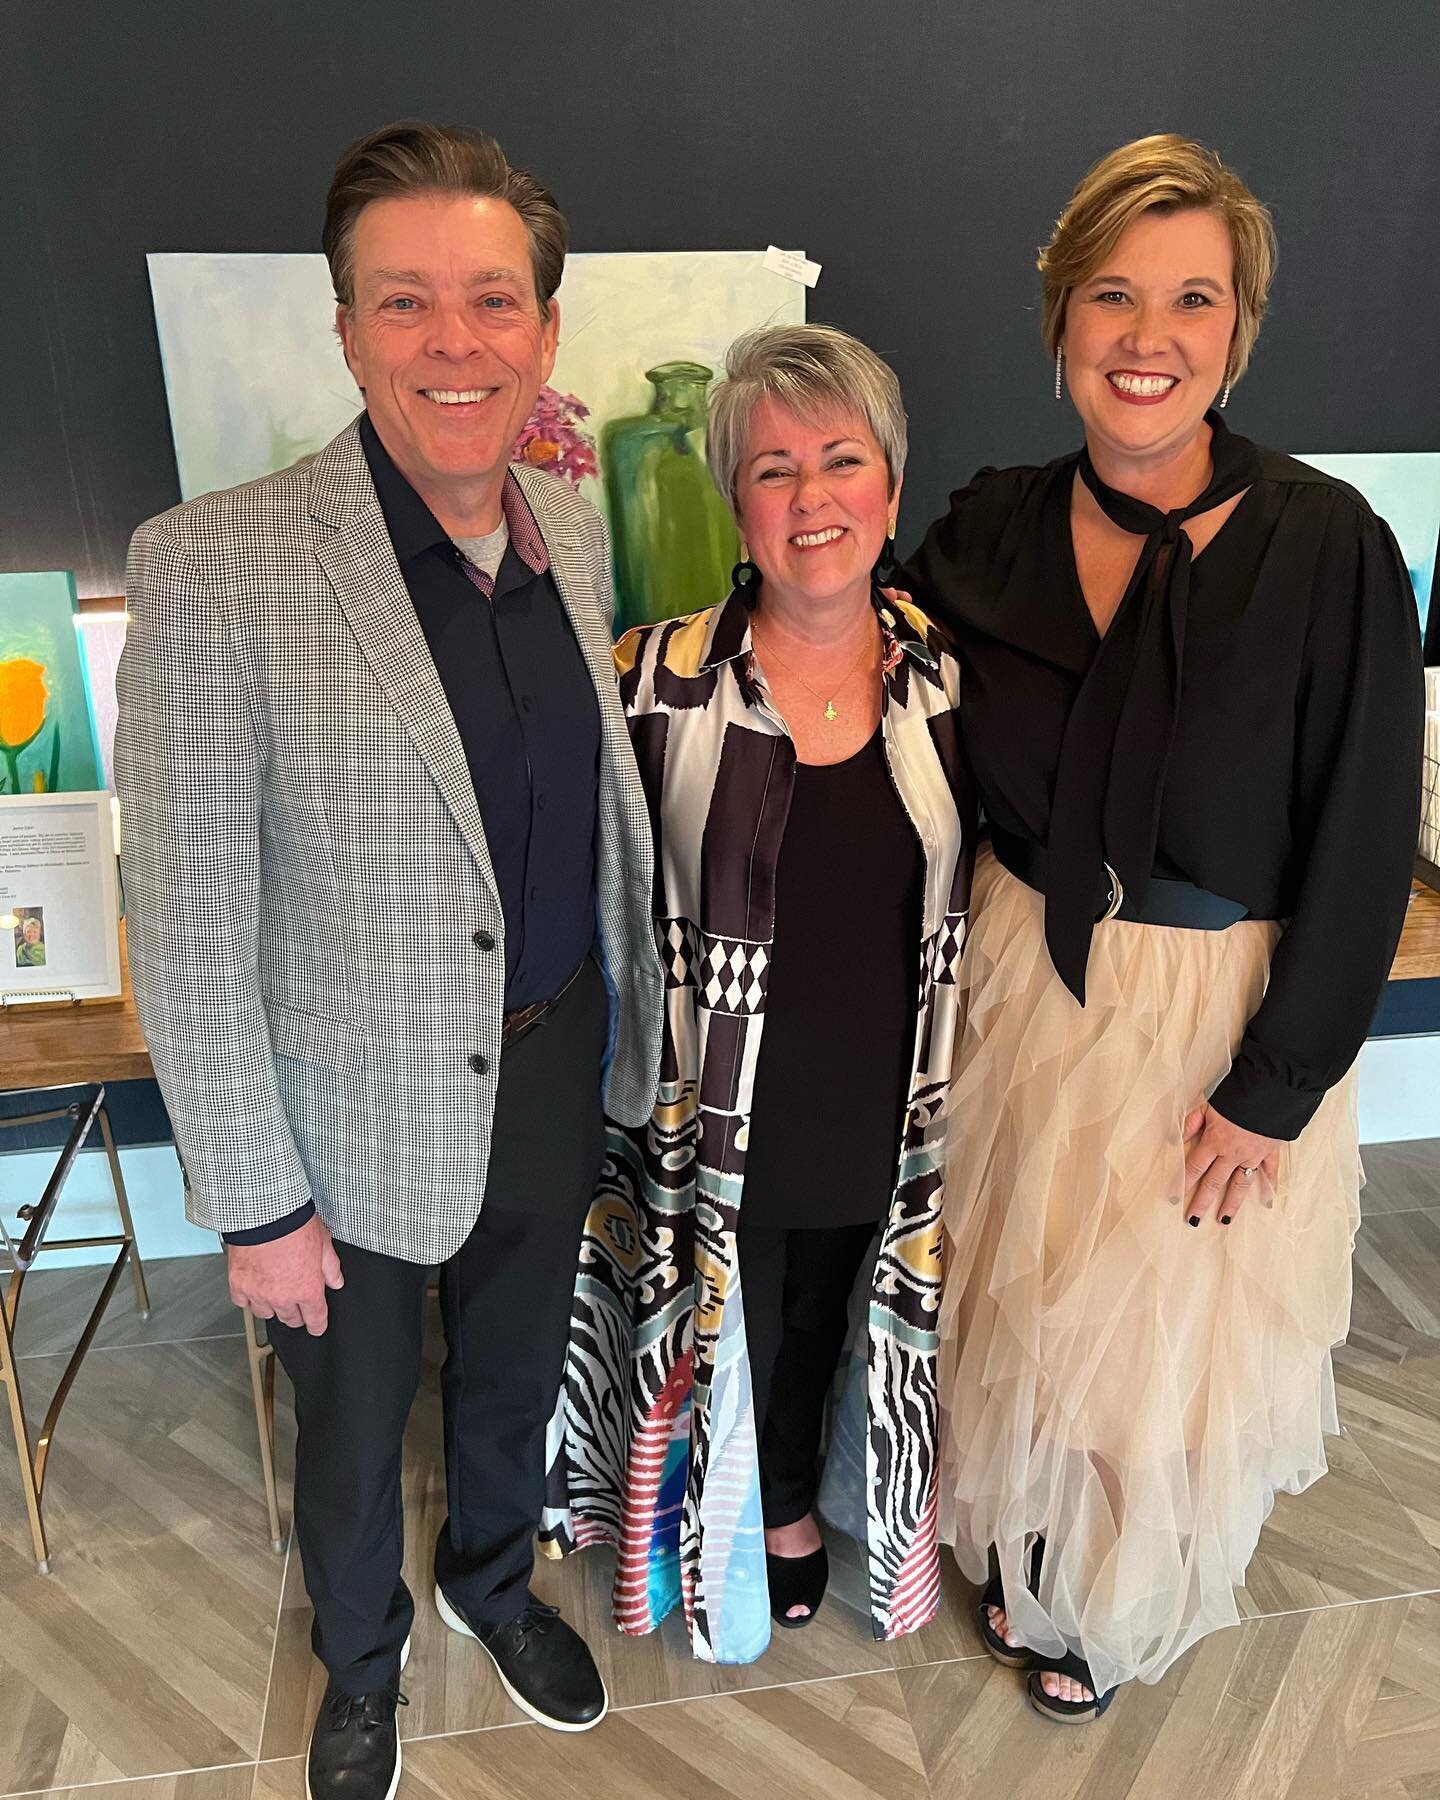 What a great night sharing my art with sweet friends and family at South Oak Title!  My heartfelt thanks go to Anna and Steve Parker for making this night so wonderful.  I am so blessed❤️. #redhawkrealty #artexhibition #artlife #blessed #artist #sout